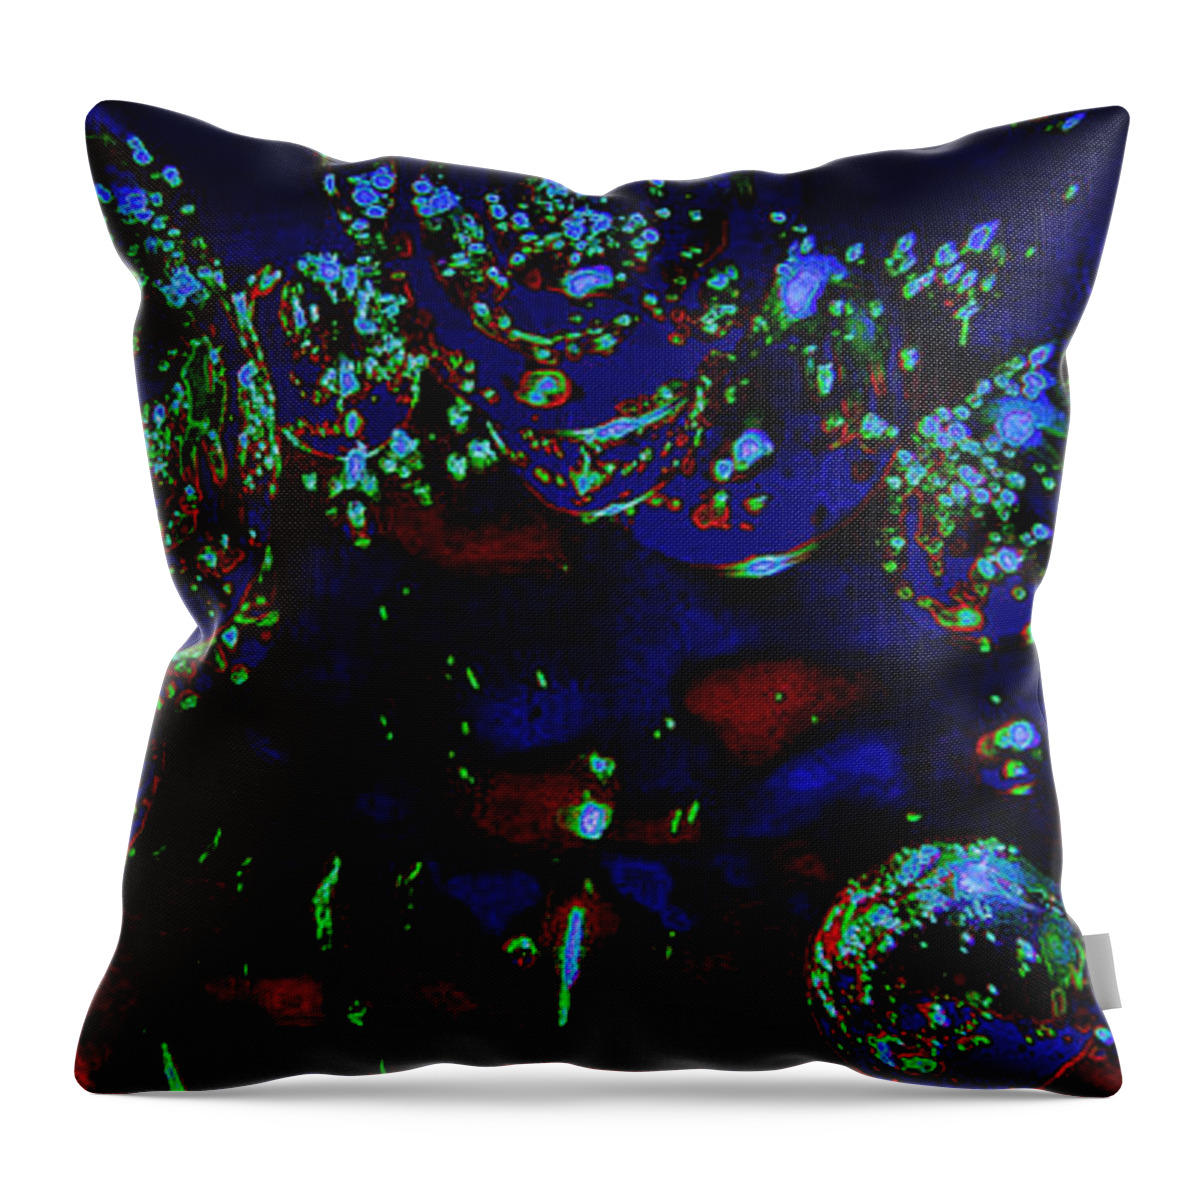 Escape From Waterworld Throw Pillow featuring the photograph Escape From Waterworld by James Stoshak